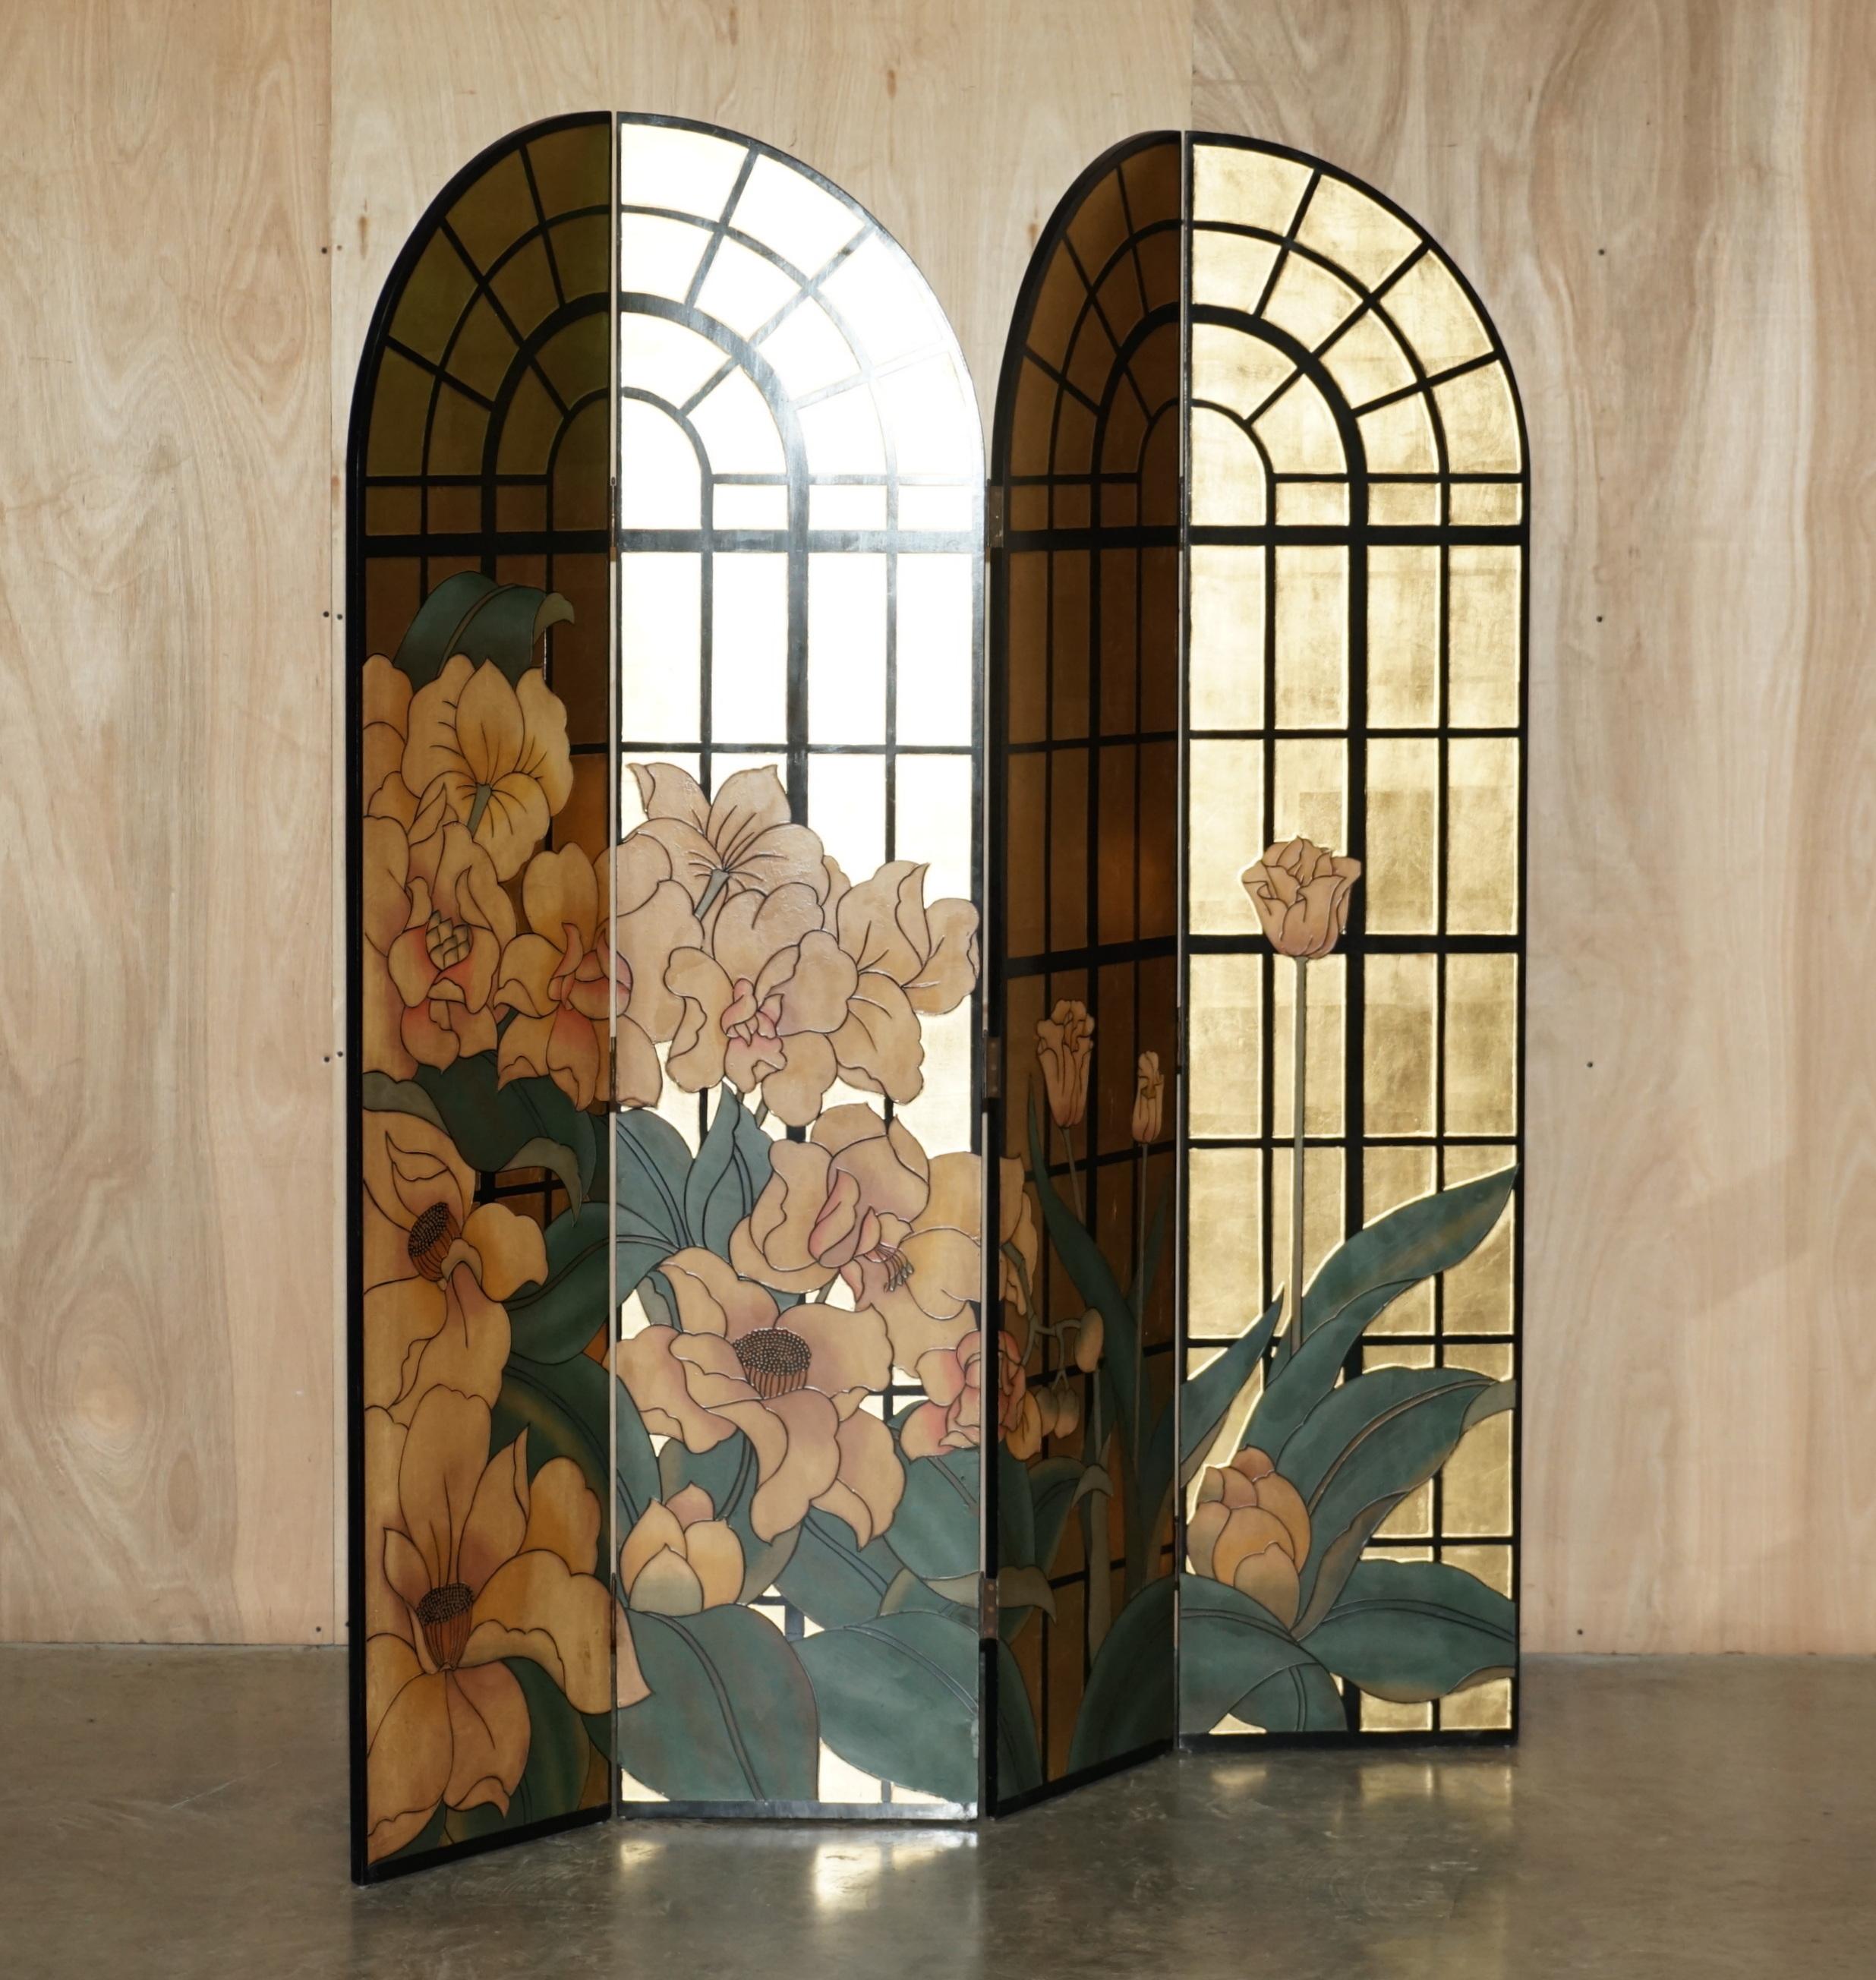 We are delighted to offer for sale this stunning Fournier Paris full size room divider bought from Liberty's London

A highly decorative piece of of French Art in the form of a large room divider. Made my the geniuses at Fournier, they have